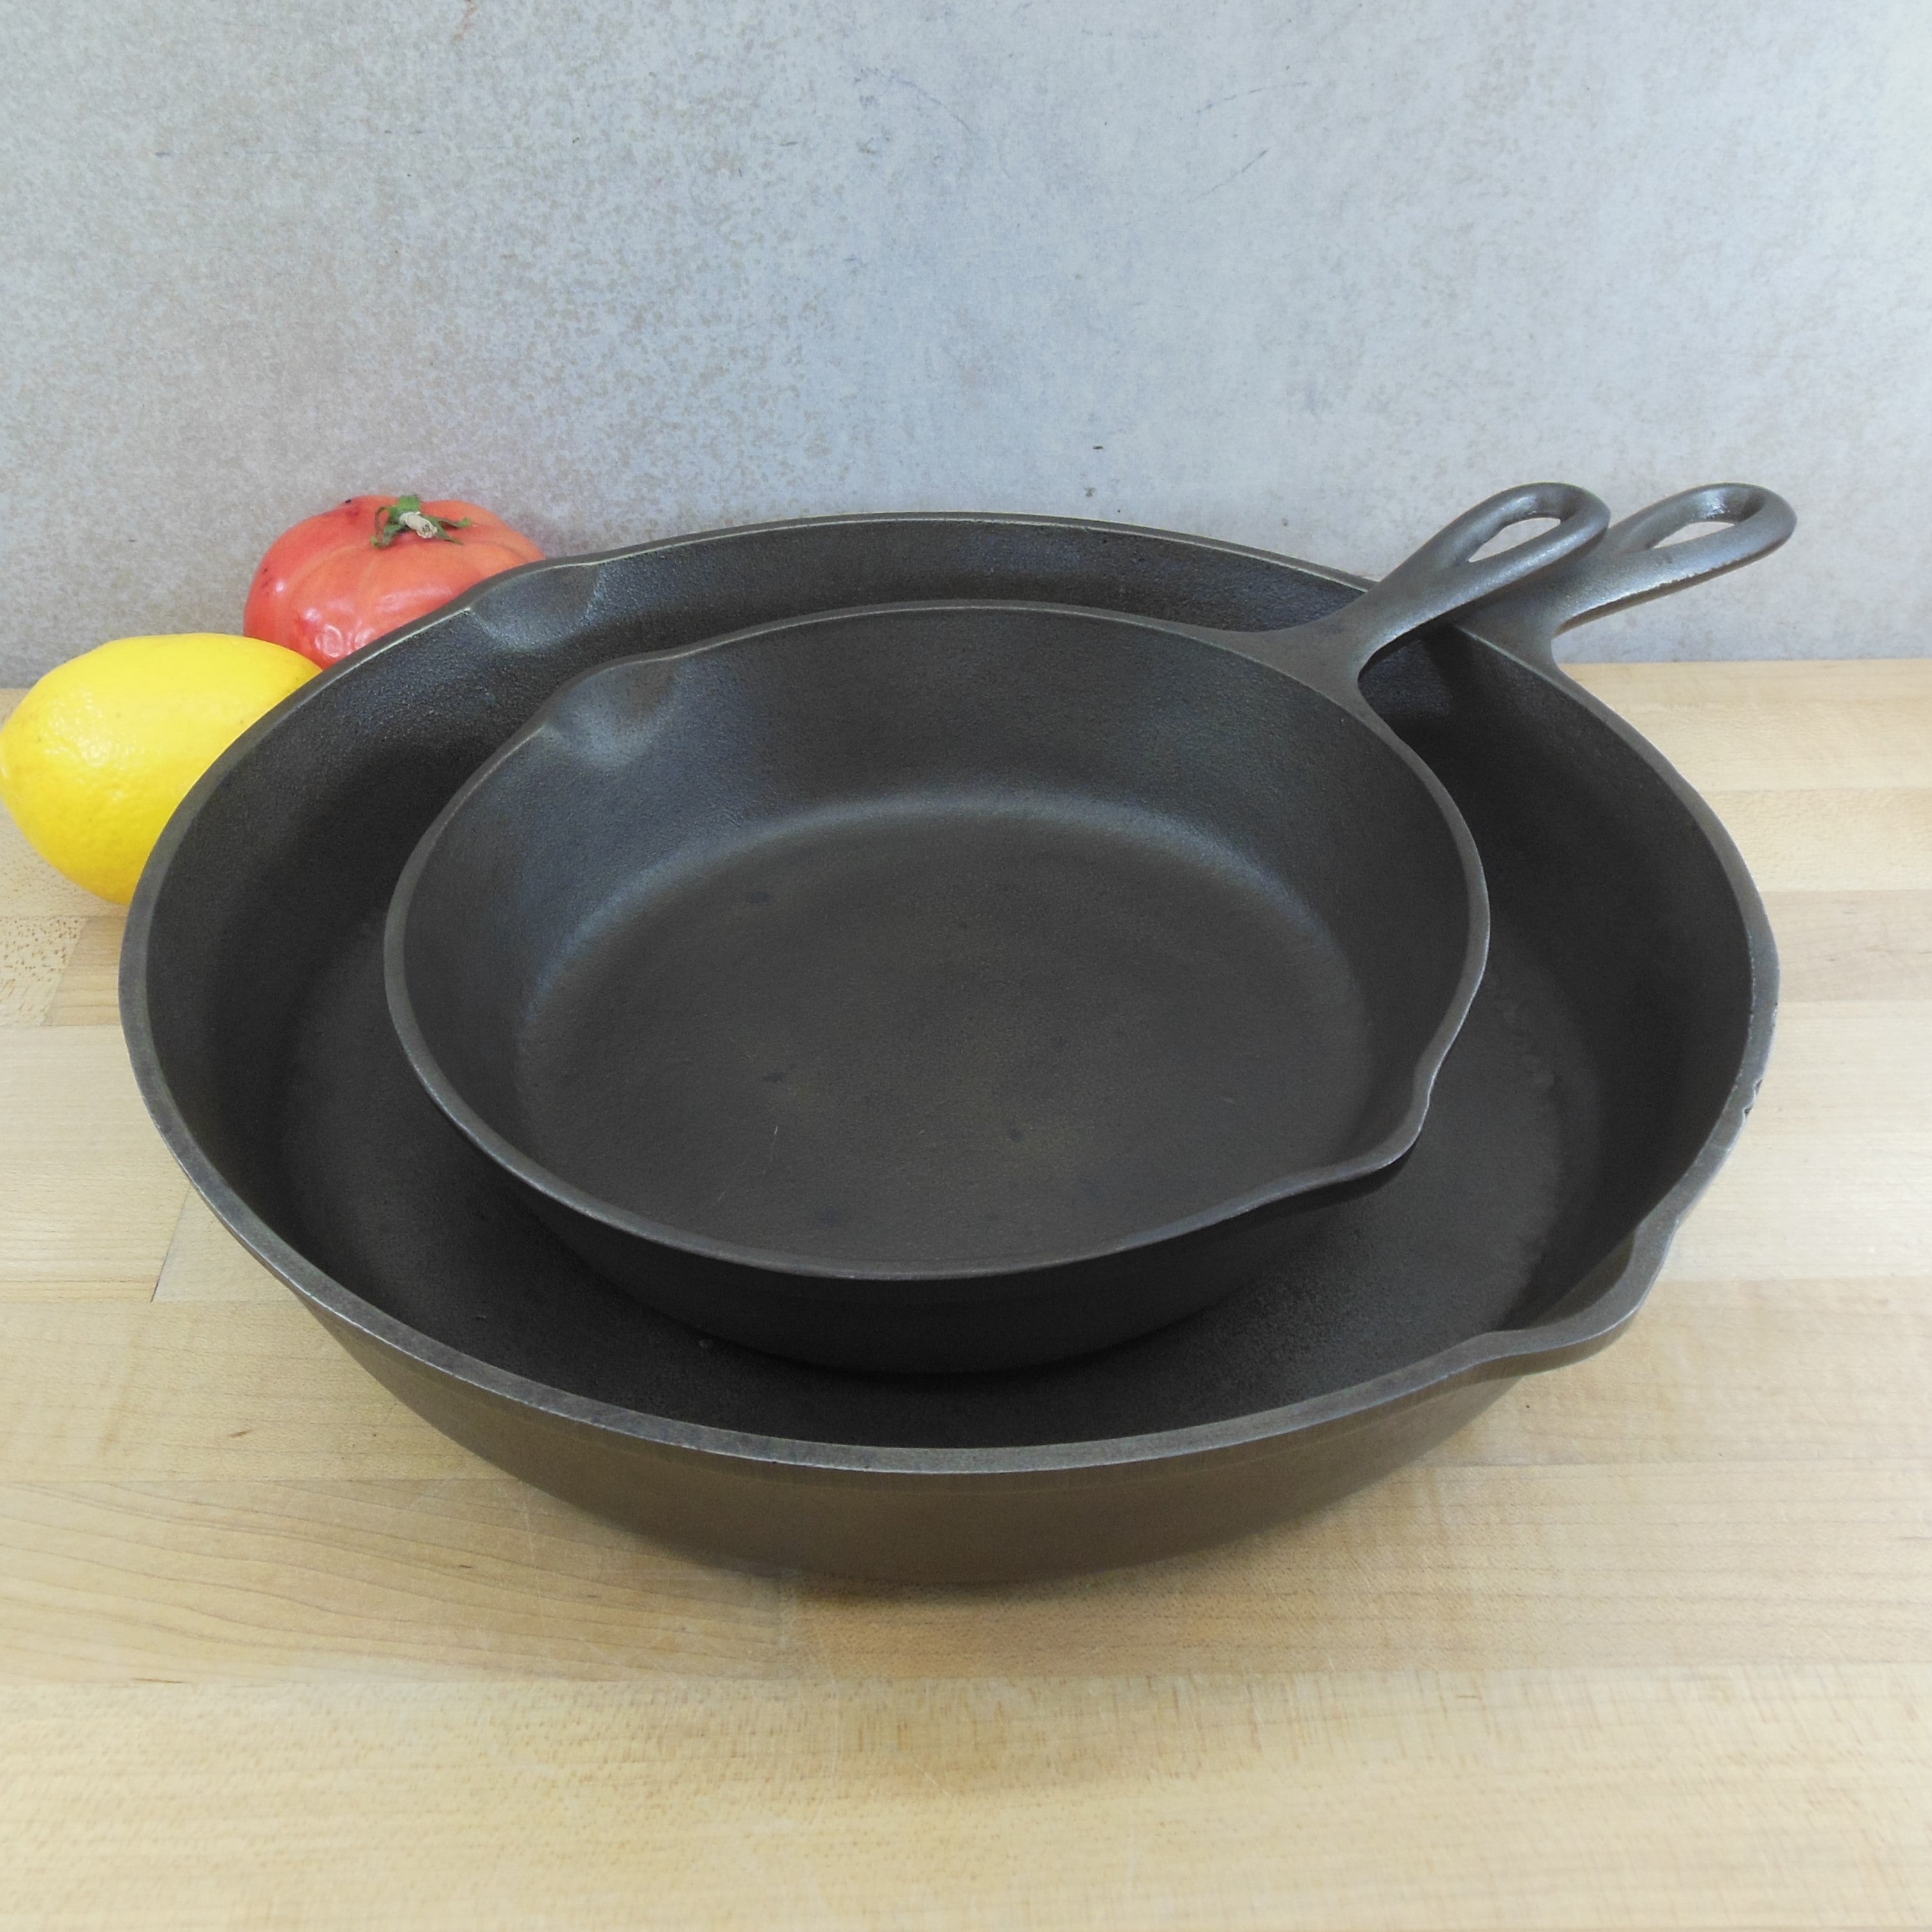 Lodge #14 Cast Iron Skillet With 3 Notches And With US Mark Circa 1950s To  Early 1960s Vintage